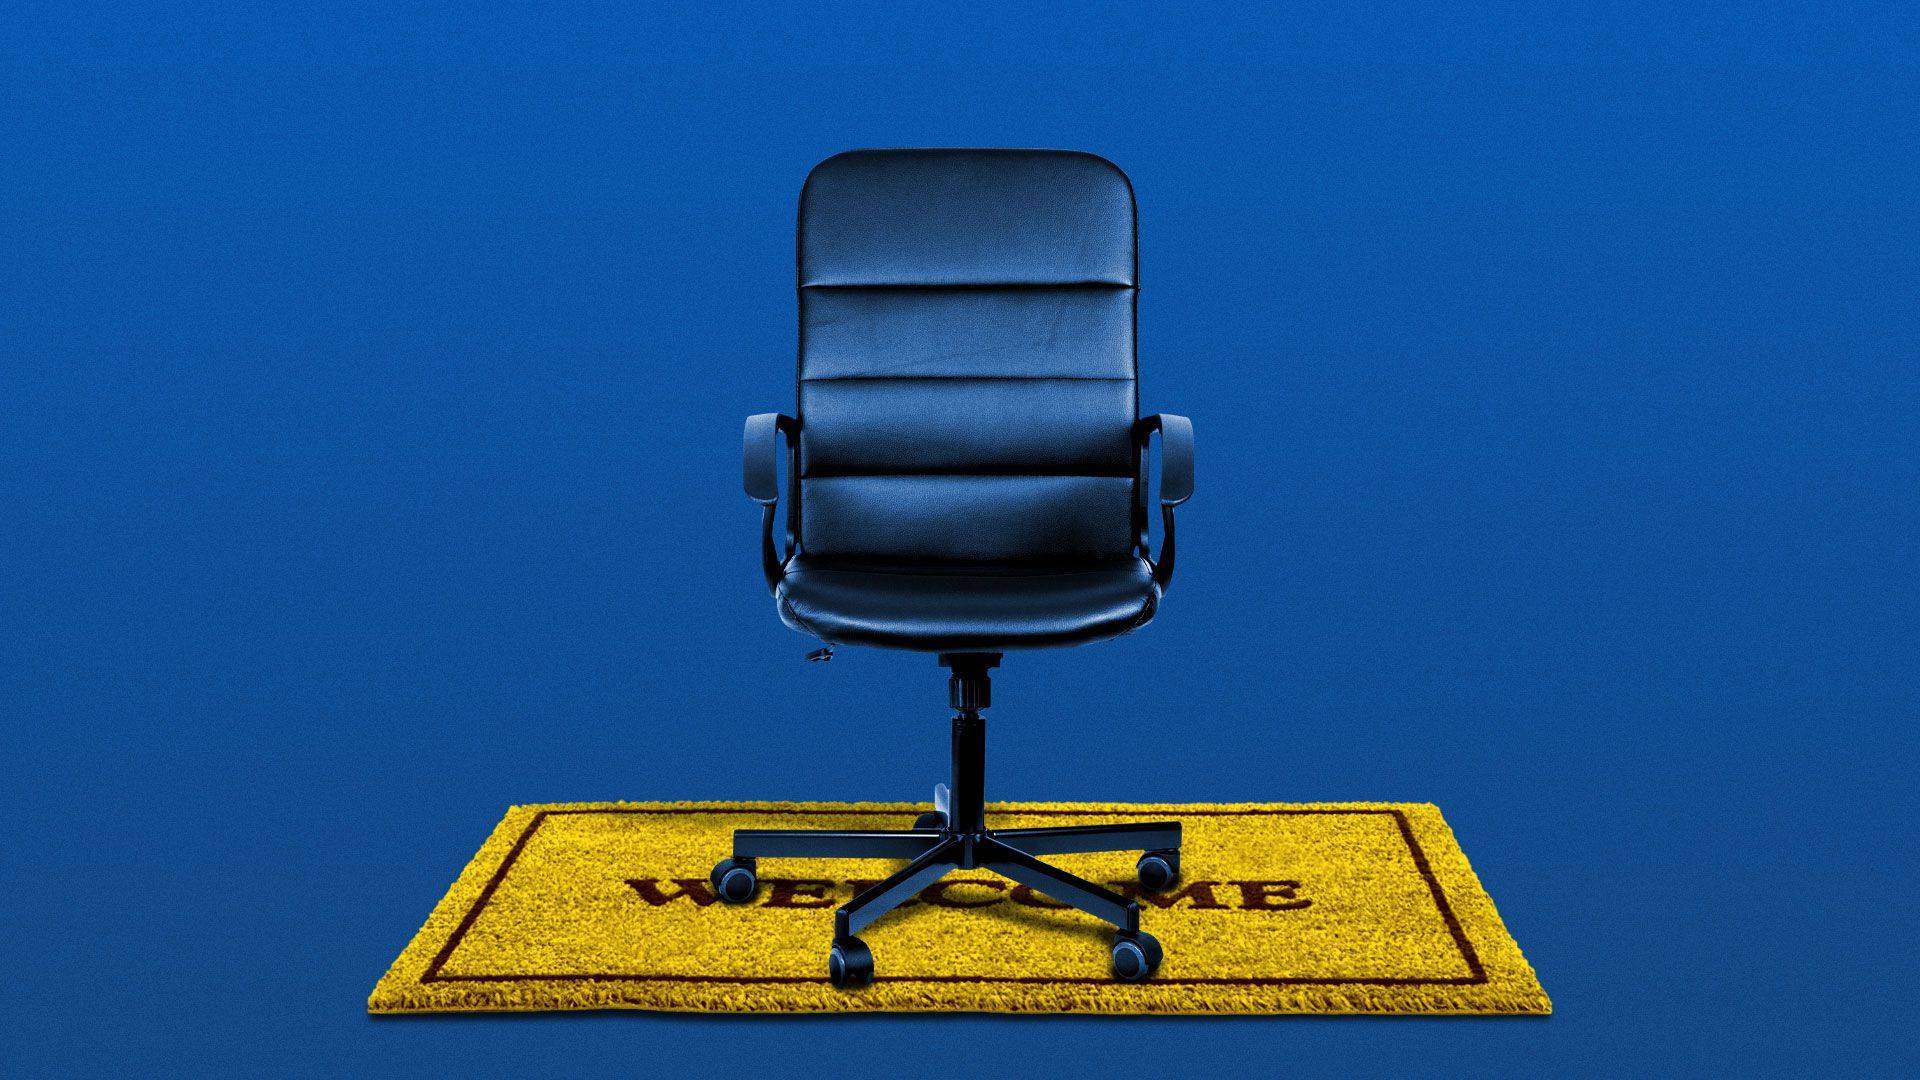 Illustration of office chair on a 